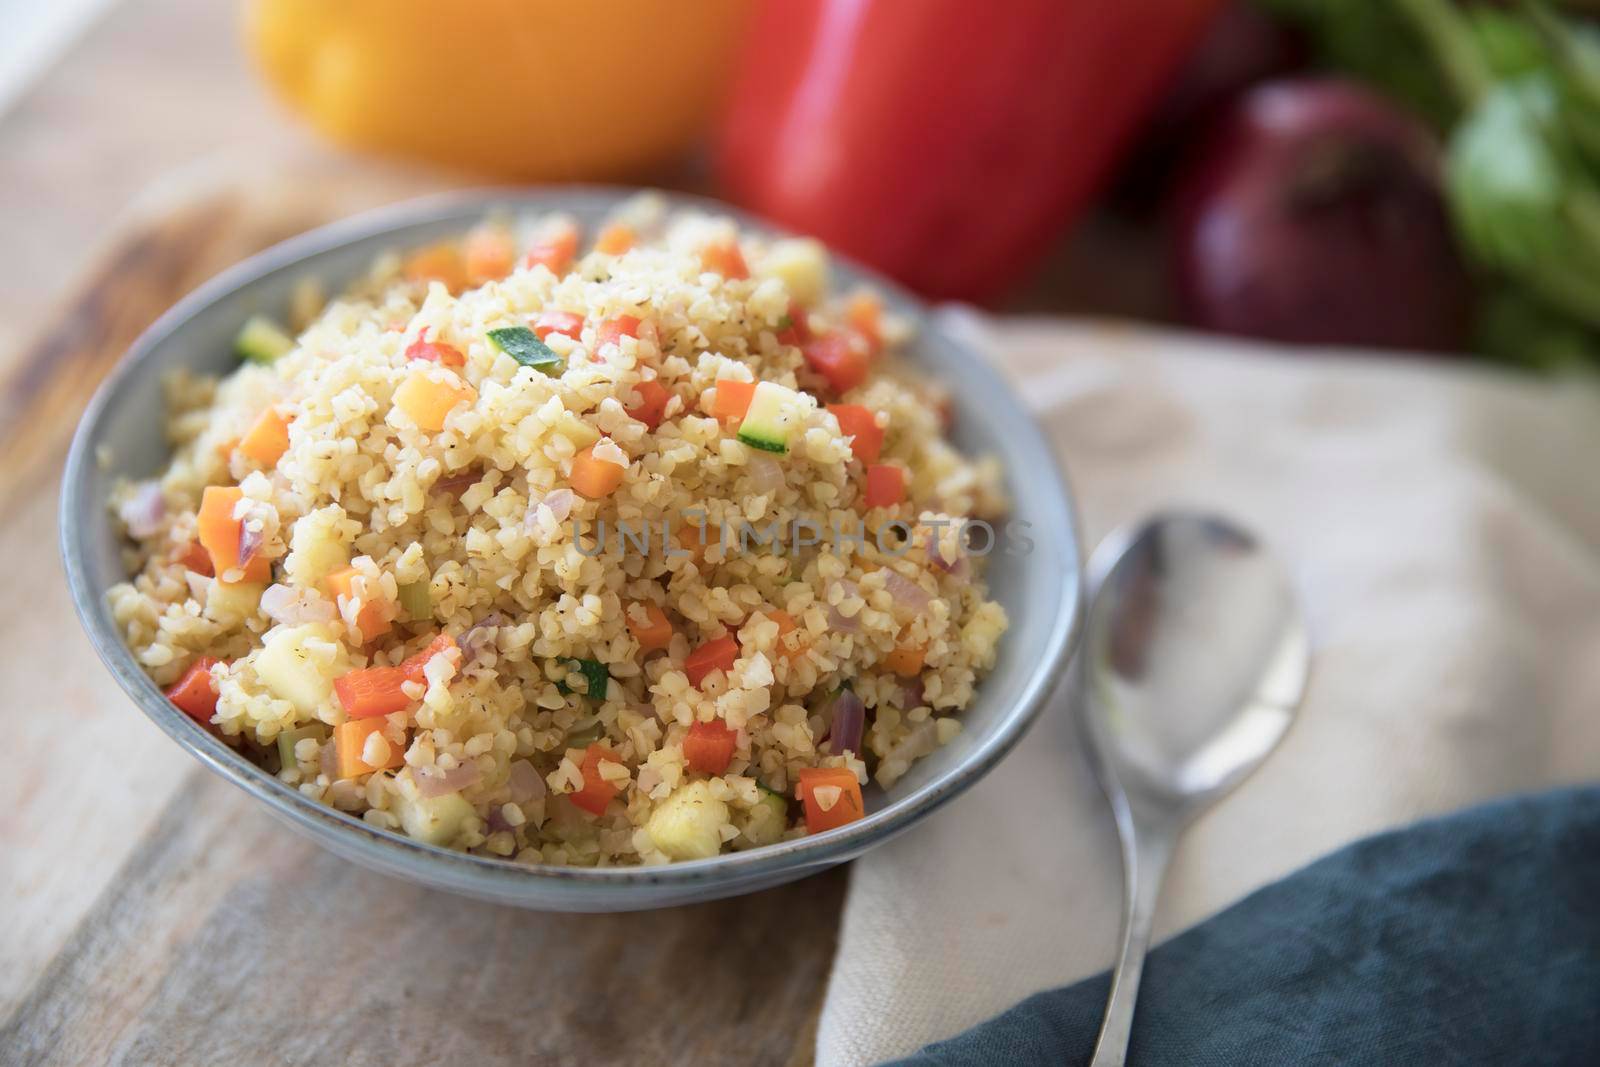 Bowl of vegan bulgur pilaf with carrots, red peppers, onions and zucchini.